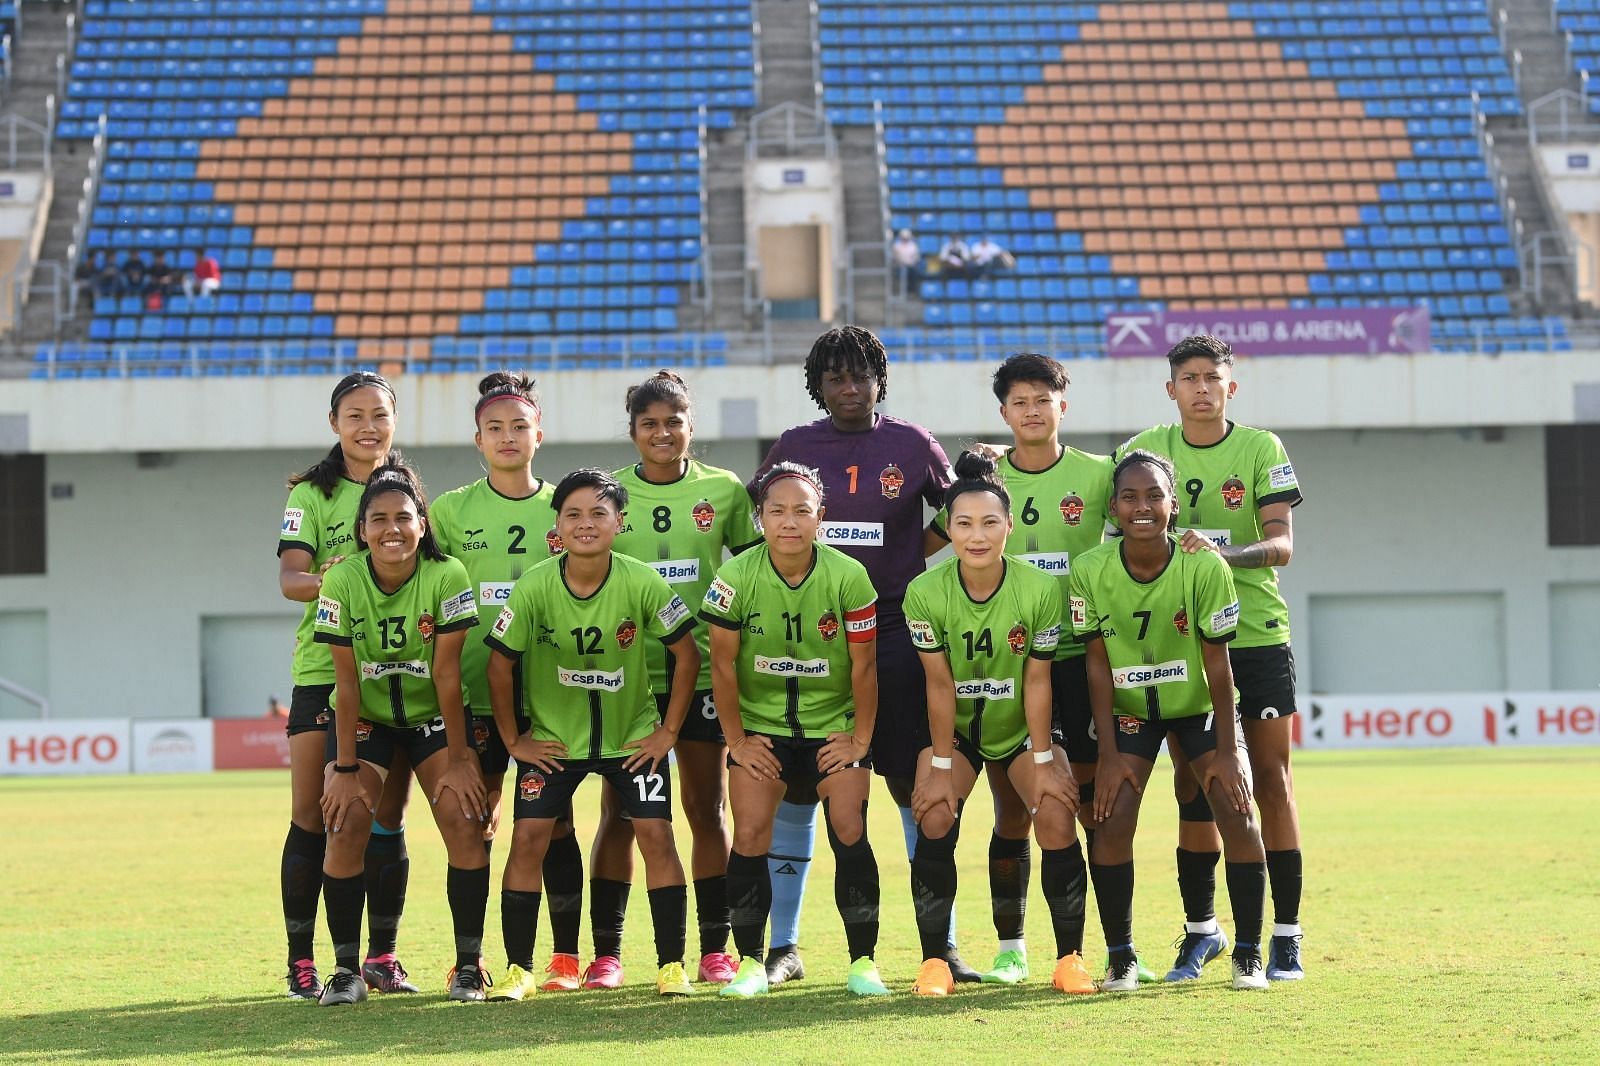 Gokulam Kerala FC are the defending champions of the Indian Women